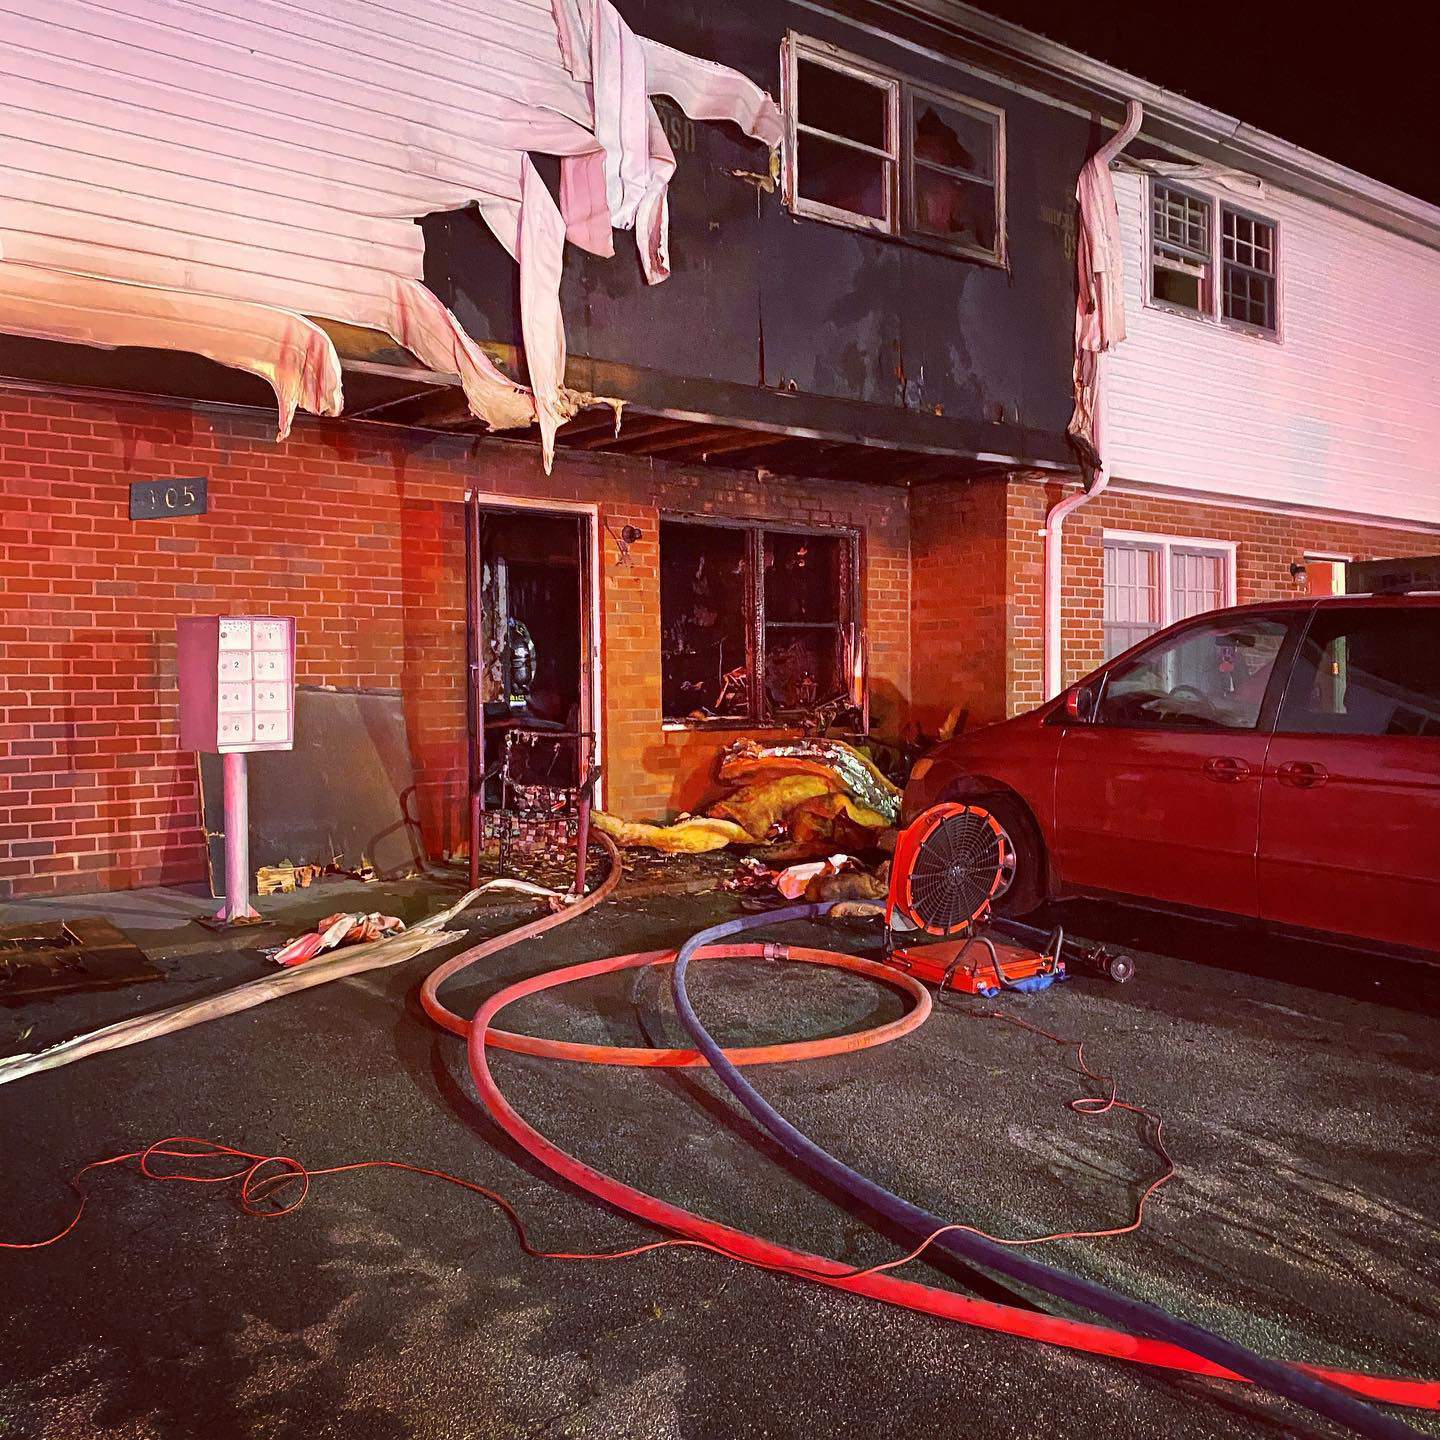 5 displaced after fire was intentionally started at a Danville apartment: officials